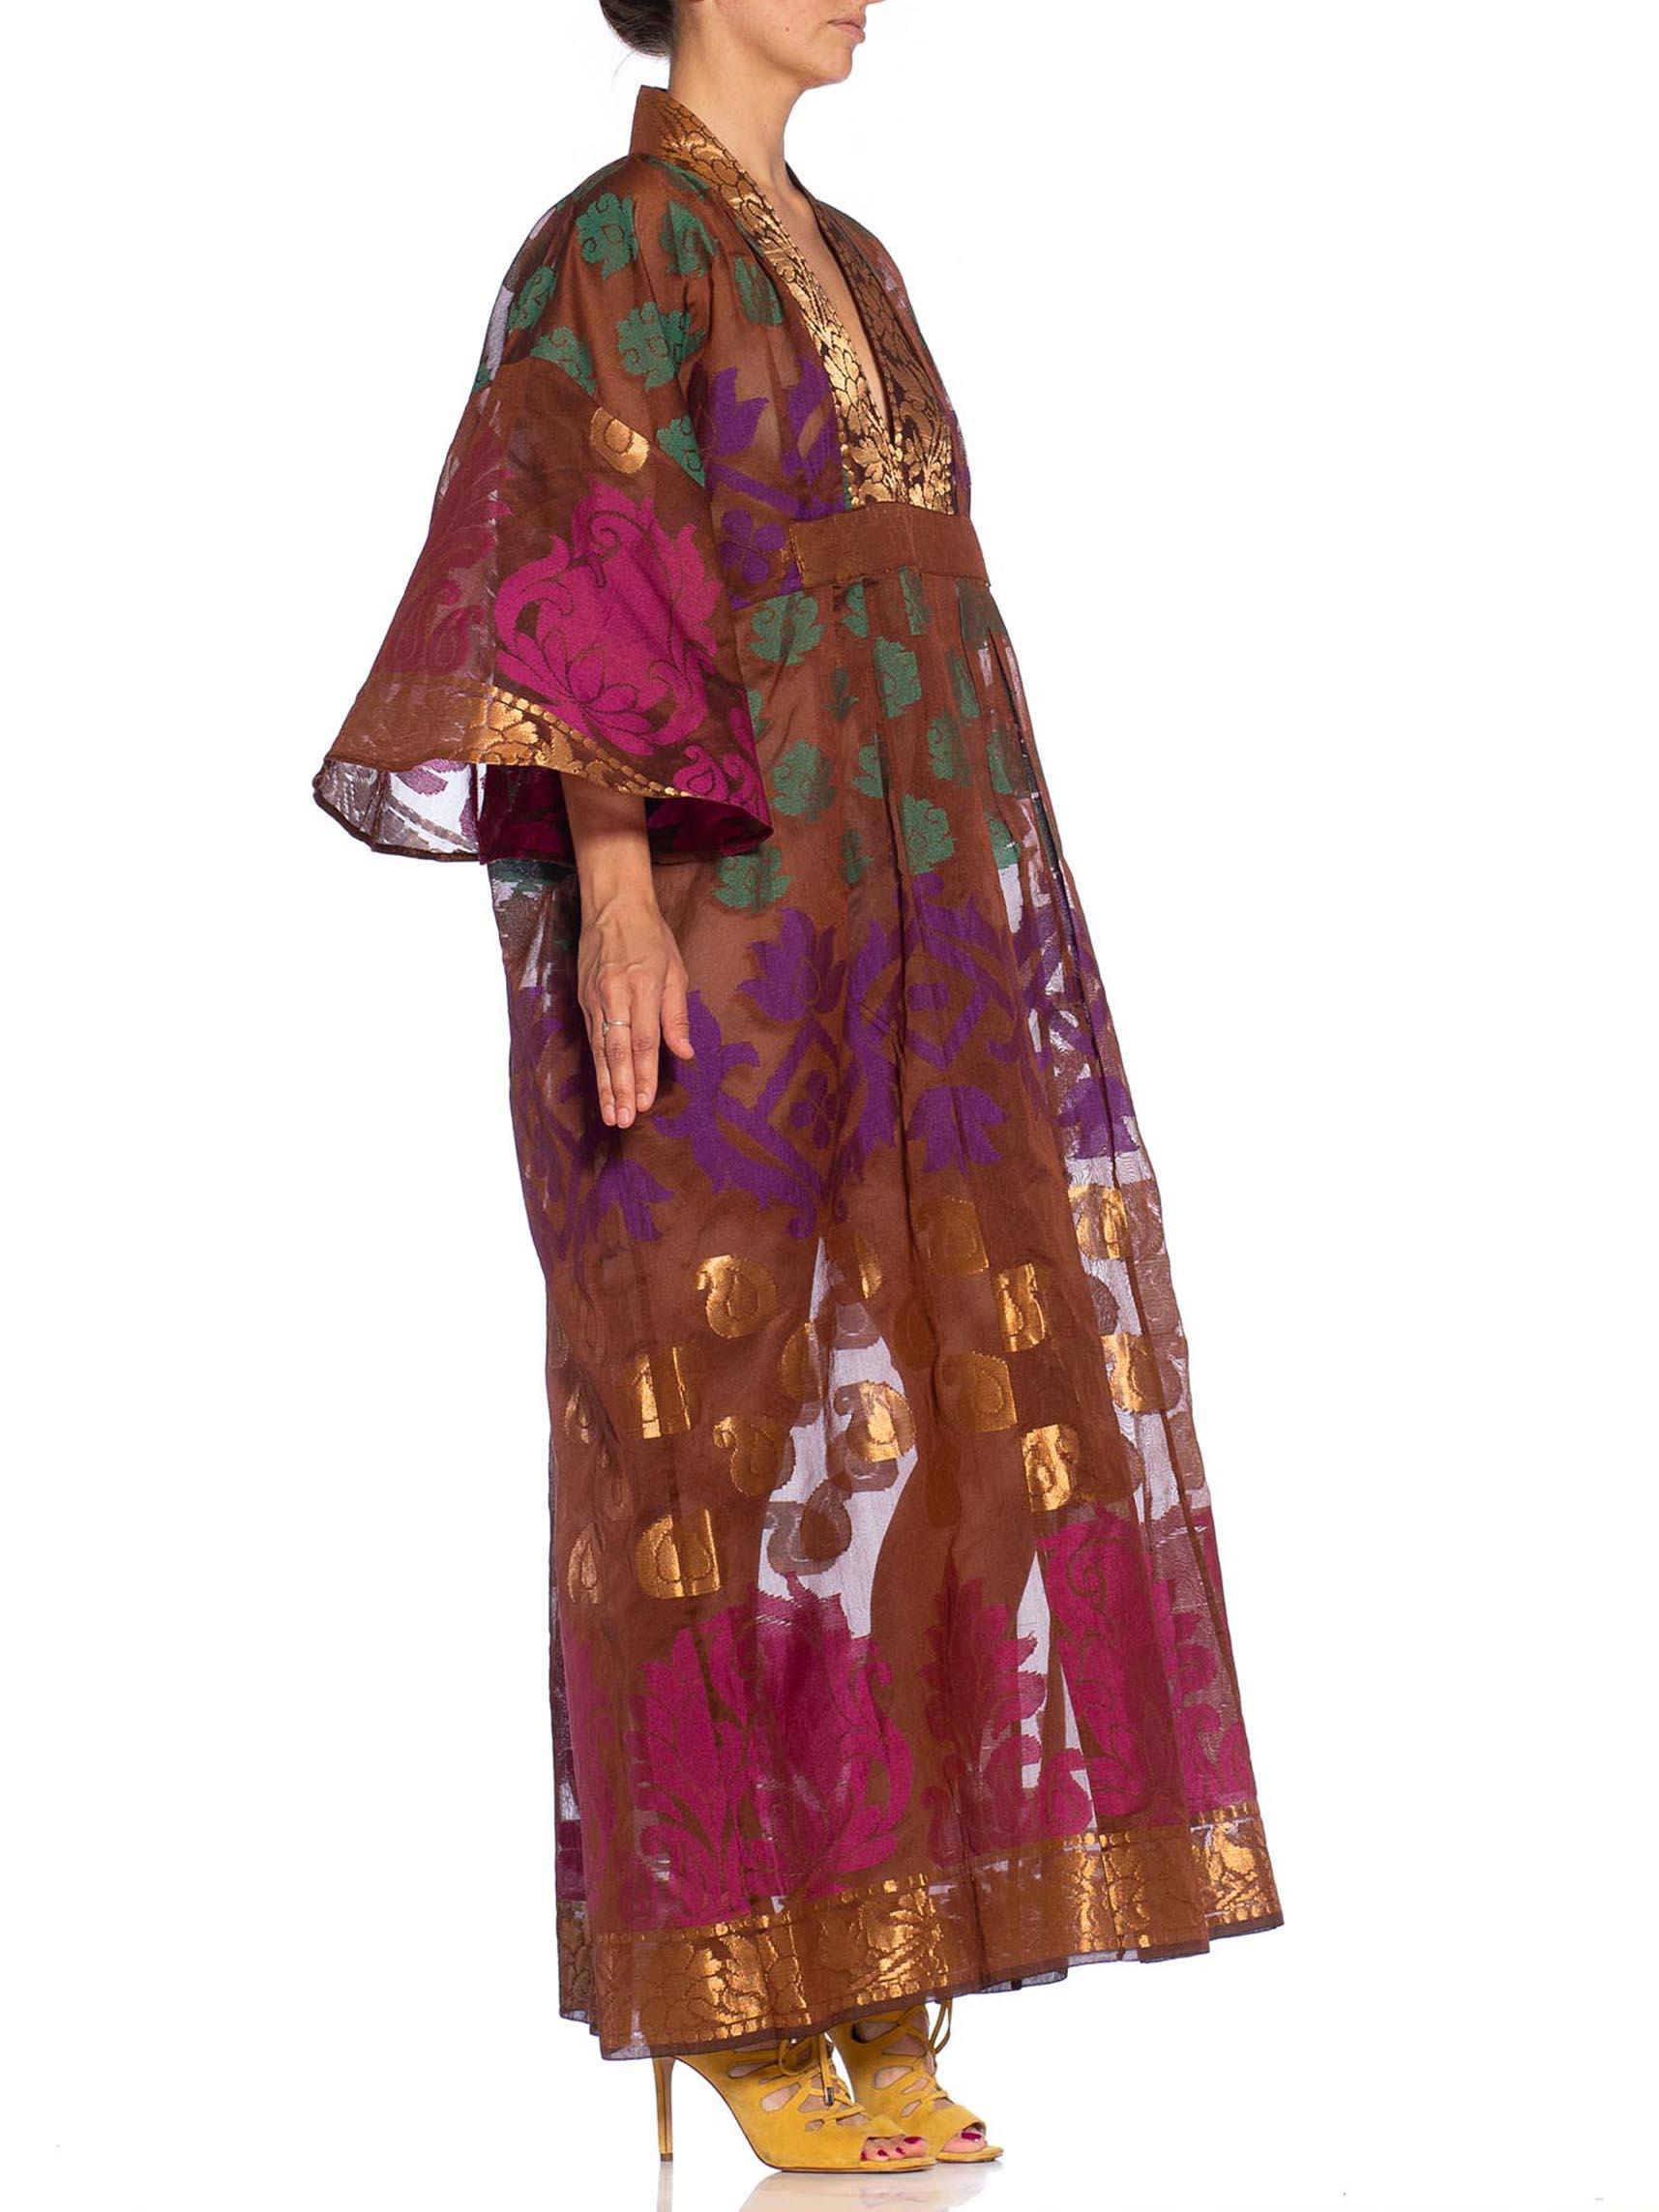 MORPHEW COLLECTION Chocolate Brown Metallic Multi  Silk Kaftan Made From Vintag In Excellent Condition For Sale In New York, NY